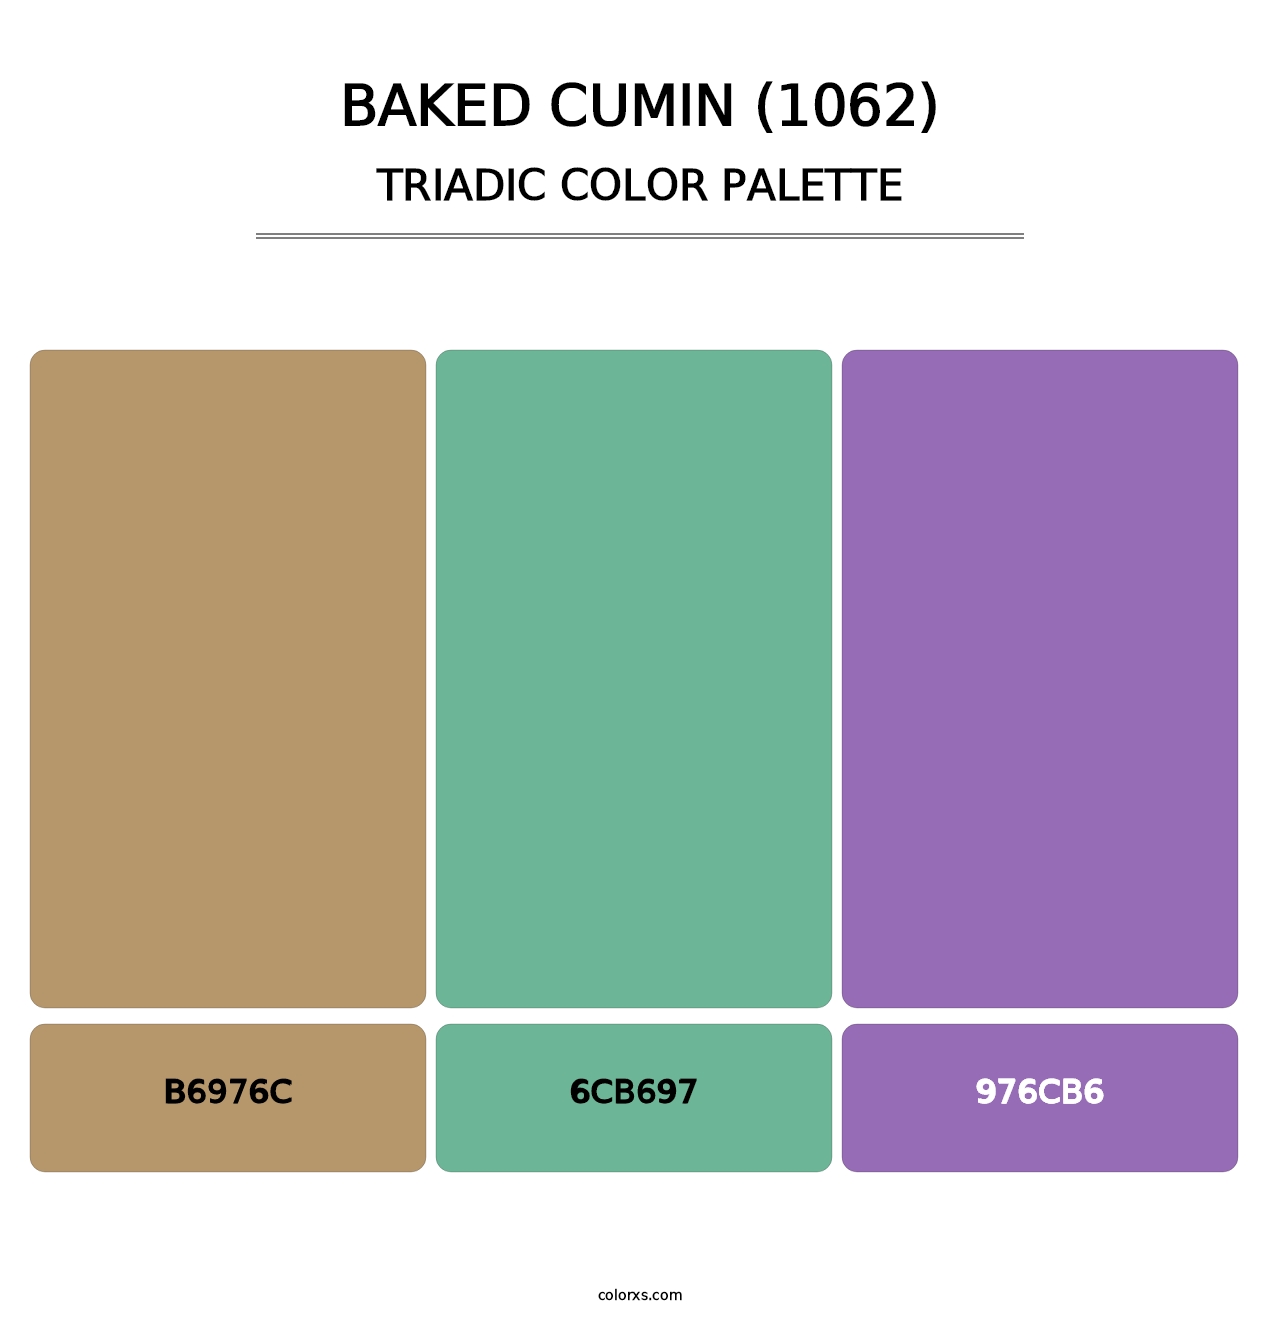 Baked Cumin (1062) - Triadic Color Palette